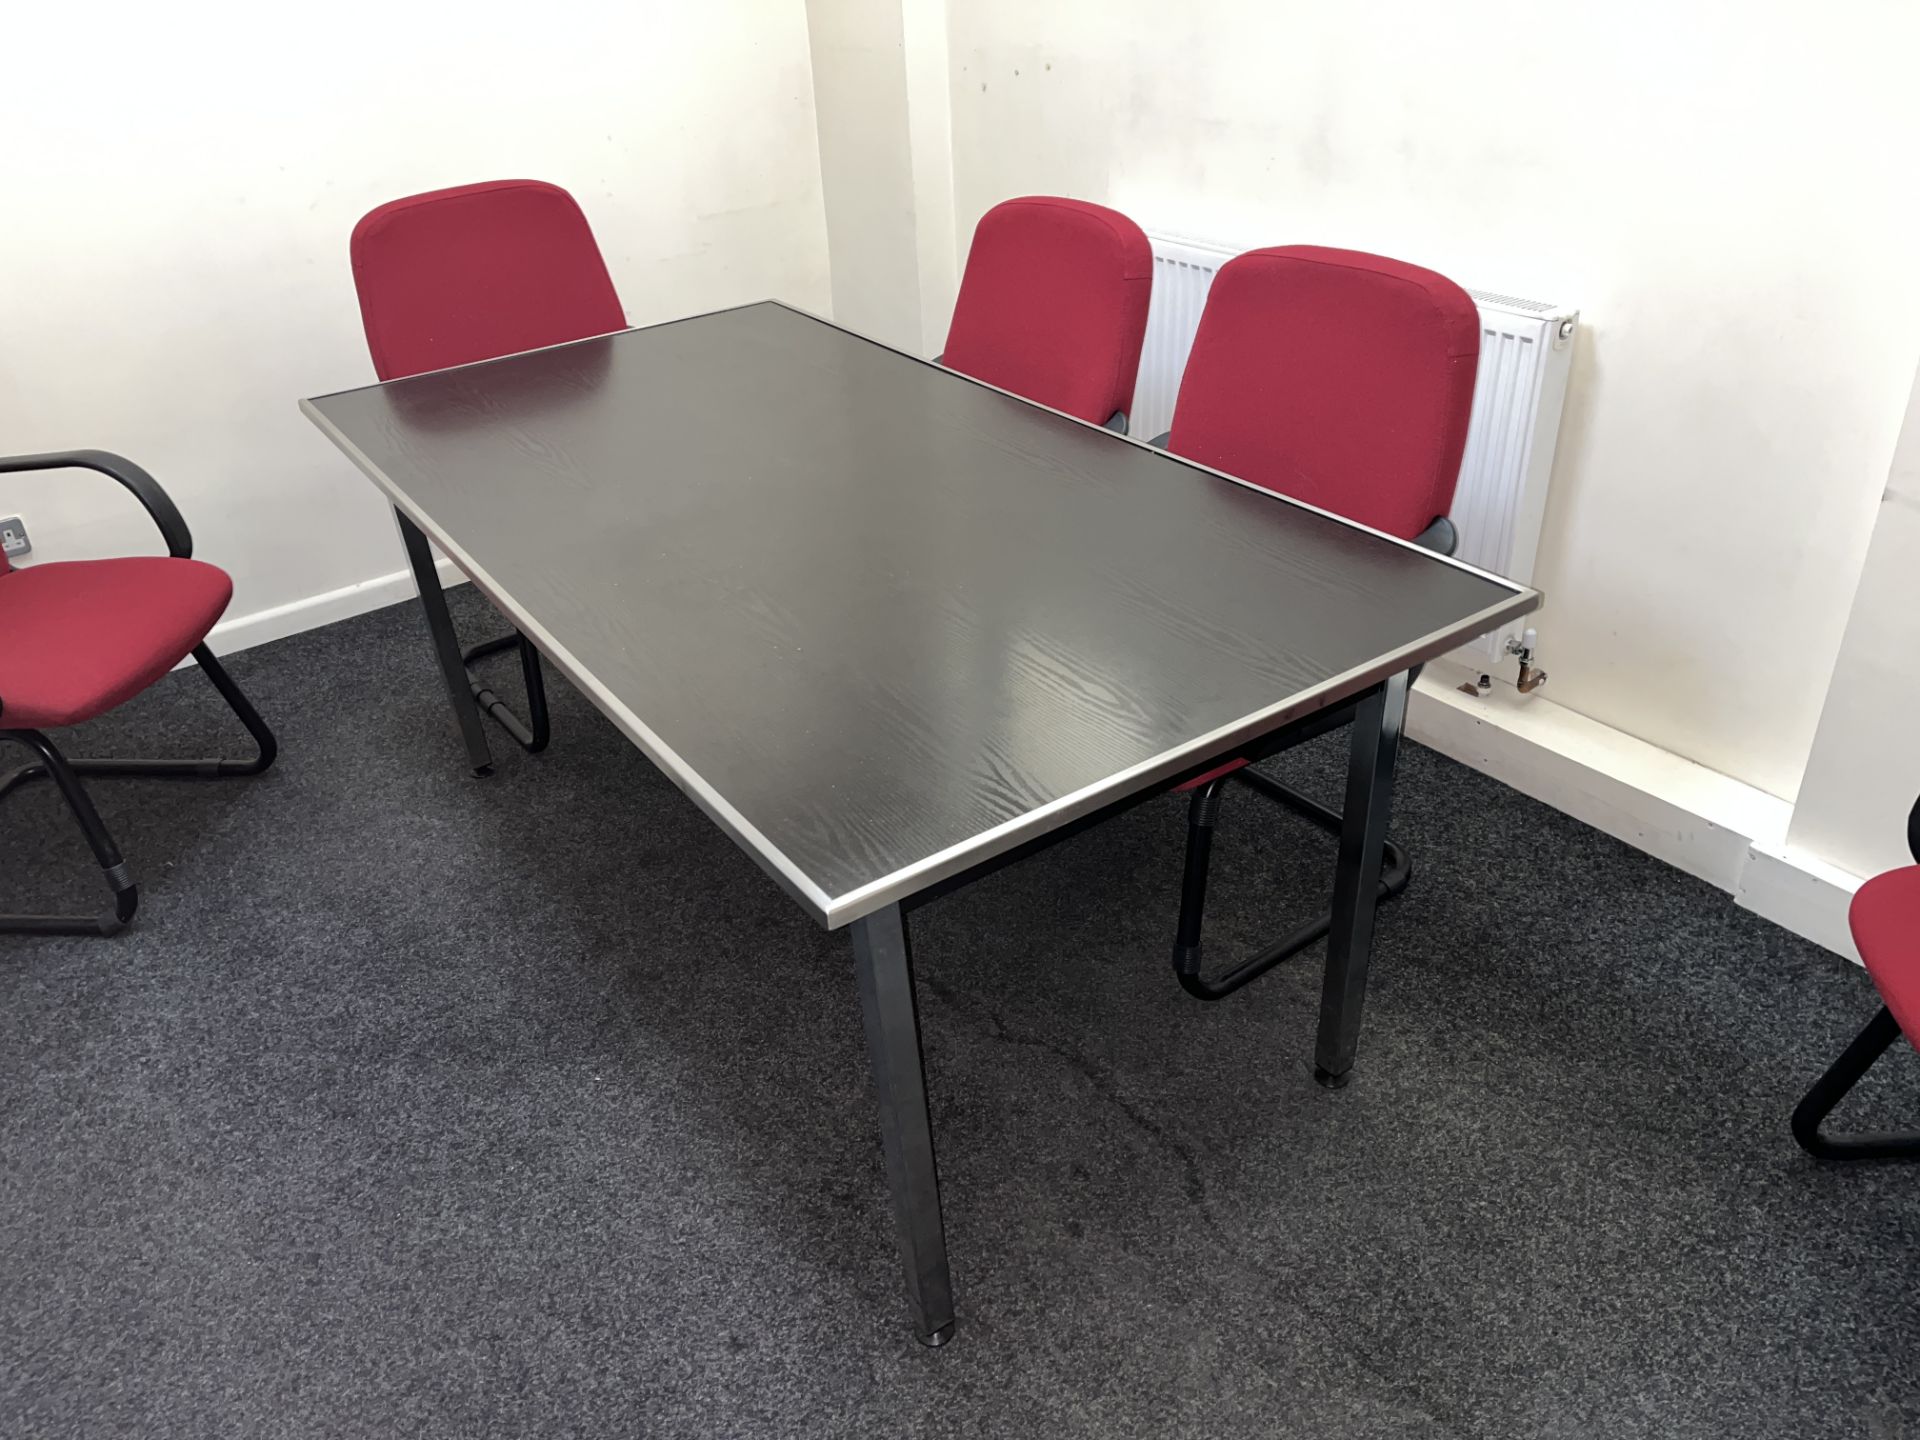 CONTENTS TO OFFICE 3 - INCLUDING 5 OFFICE DESKS, FILING CABINETS, PCS, FILING CABINETS, STAINLESS - Image 3 of 9